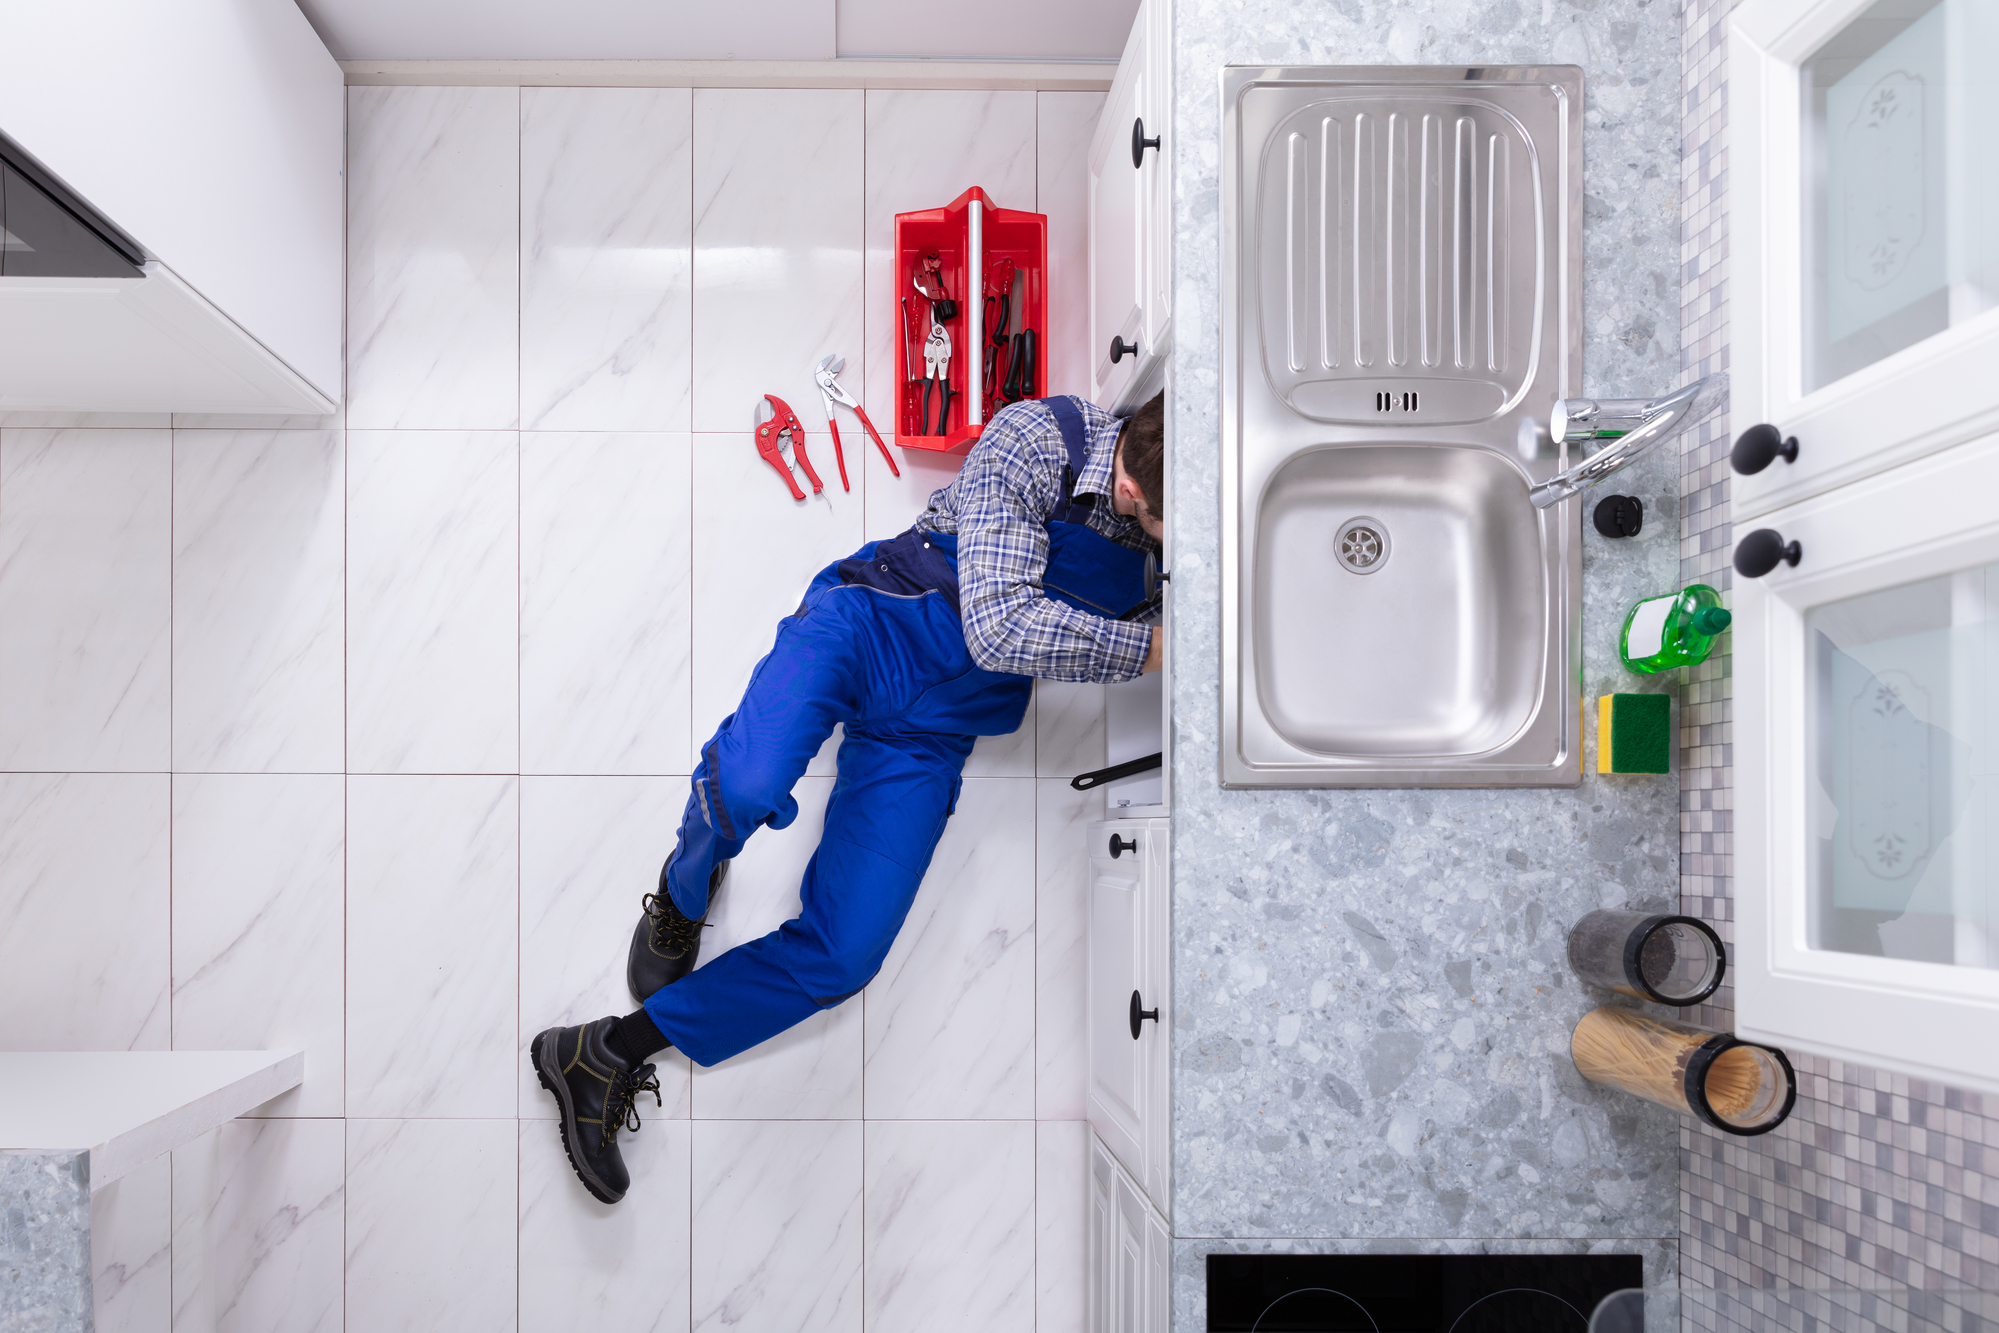 How To Prevent Accidental Water Damage Through Regular Plumbing Inspections